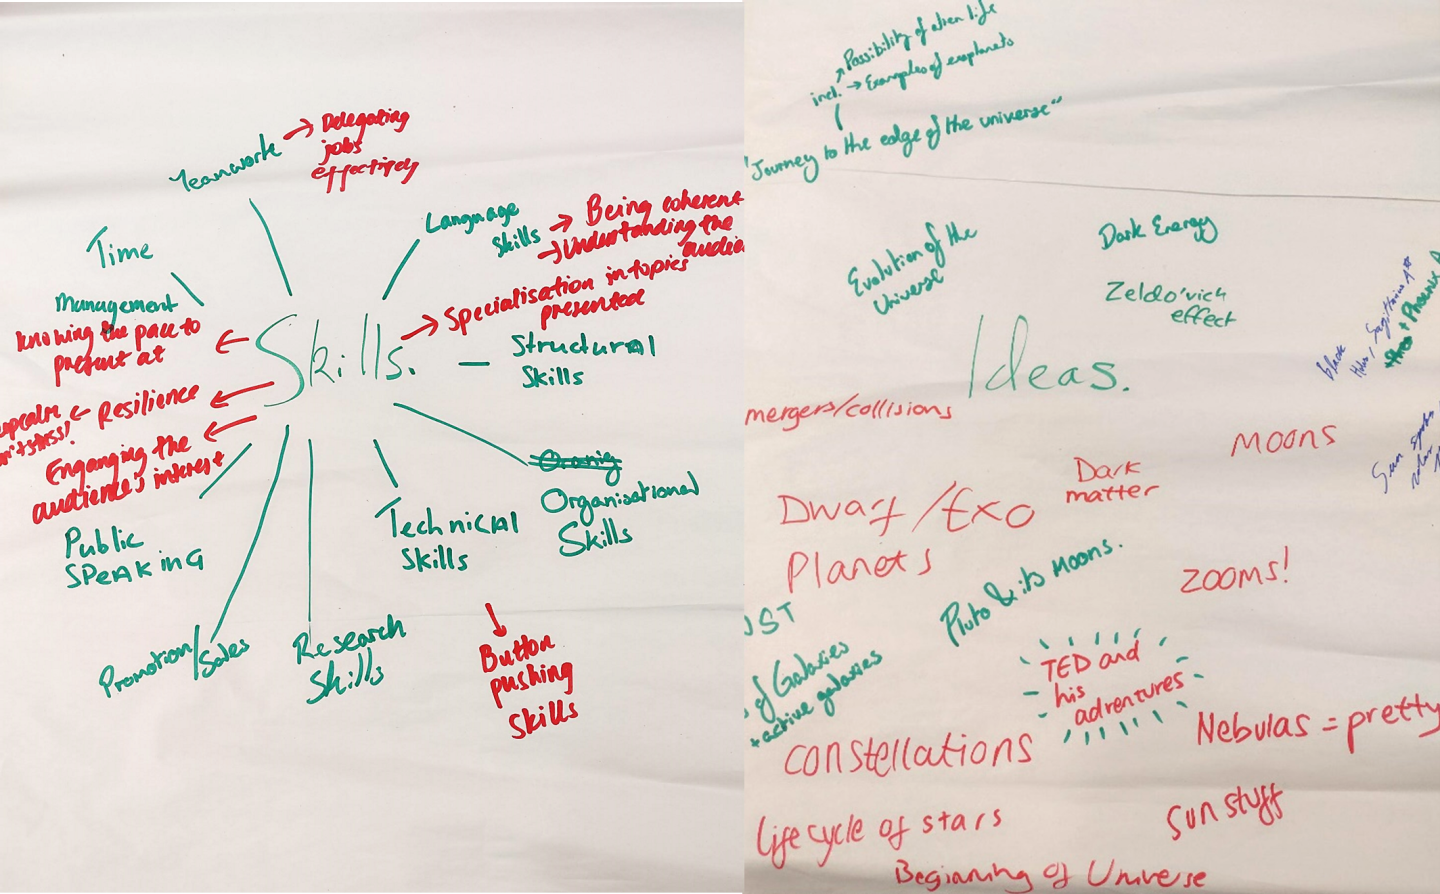 Photos of two pages of notes. One on 'Skills' and one on 'Ideas'. Both pages include notes in different colours and handwriting styles, and relate to young people planning their own planetarium show. 